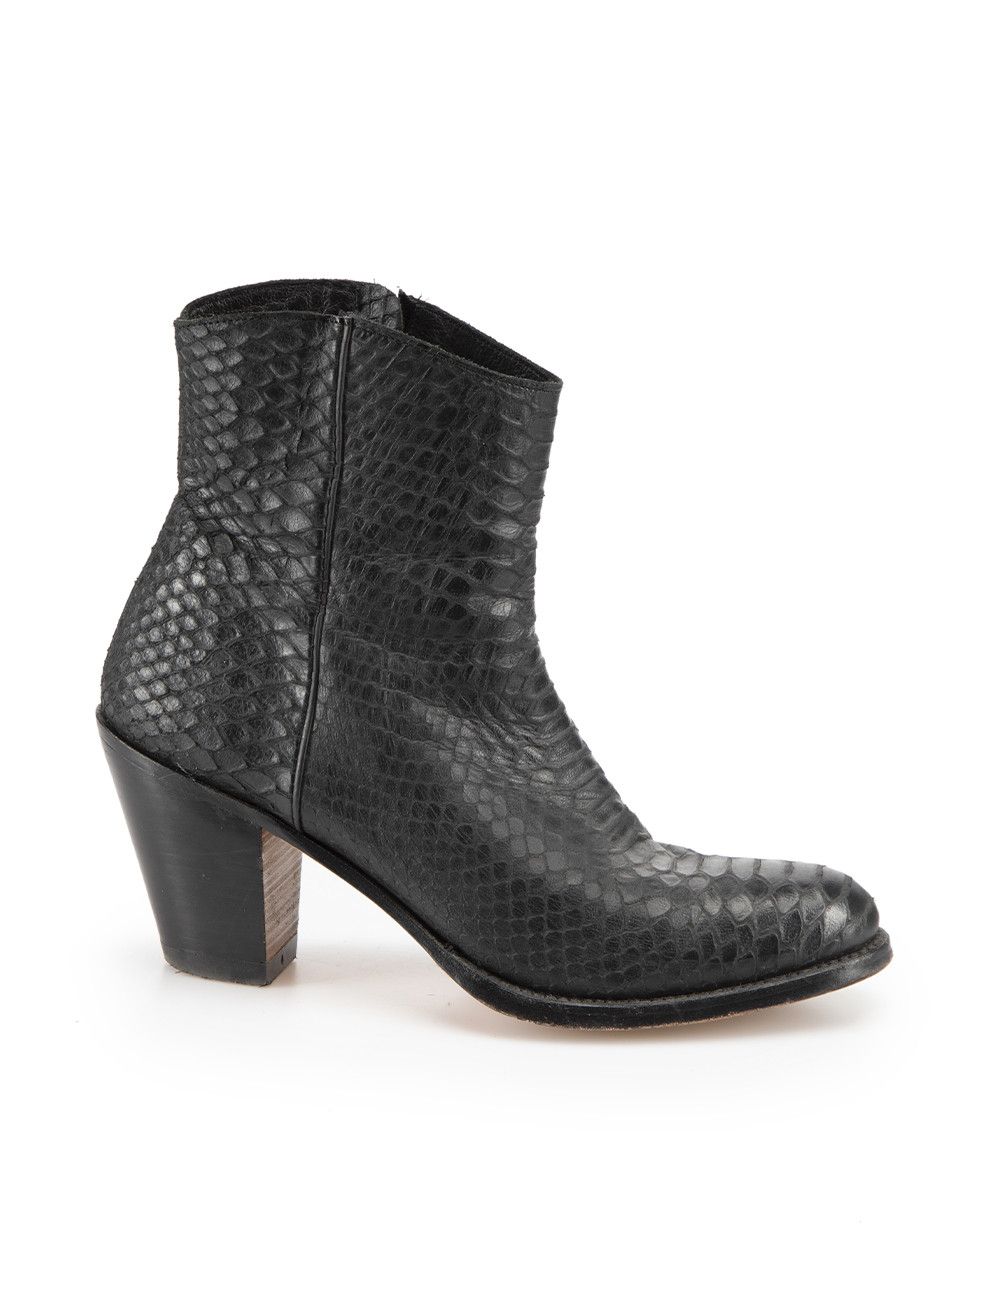 Penelope Chilvers Black Python Leather Cuban Heel Boots | Grailed